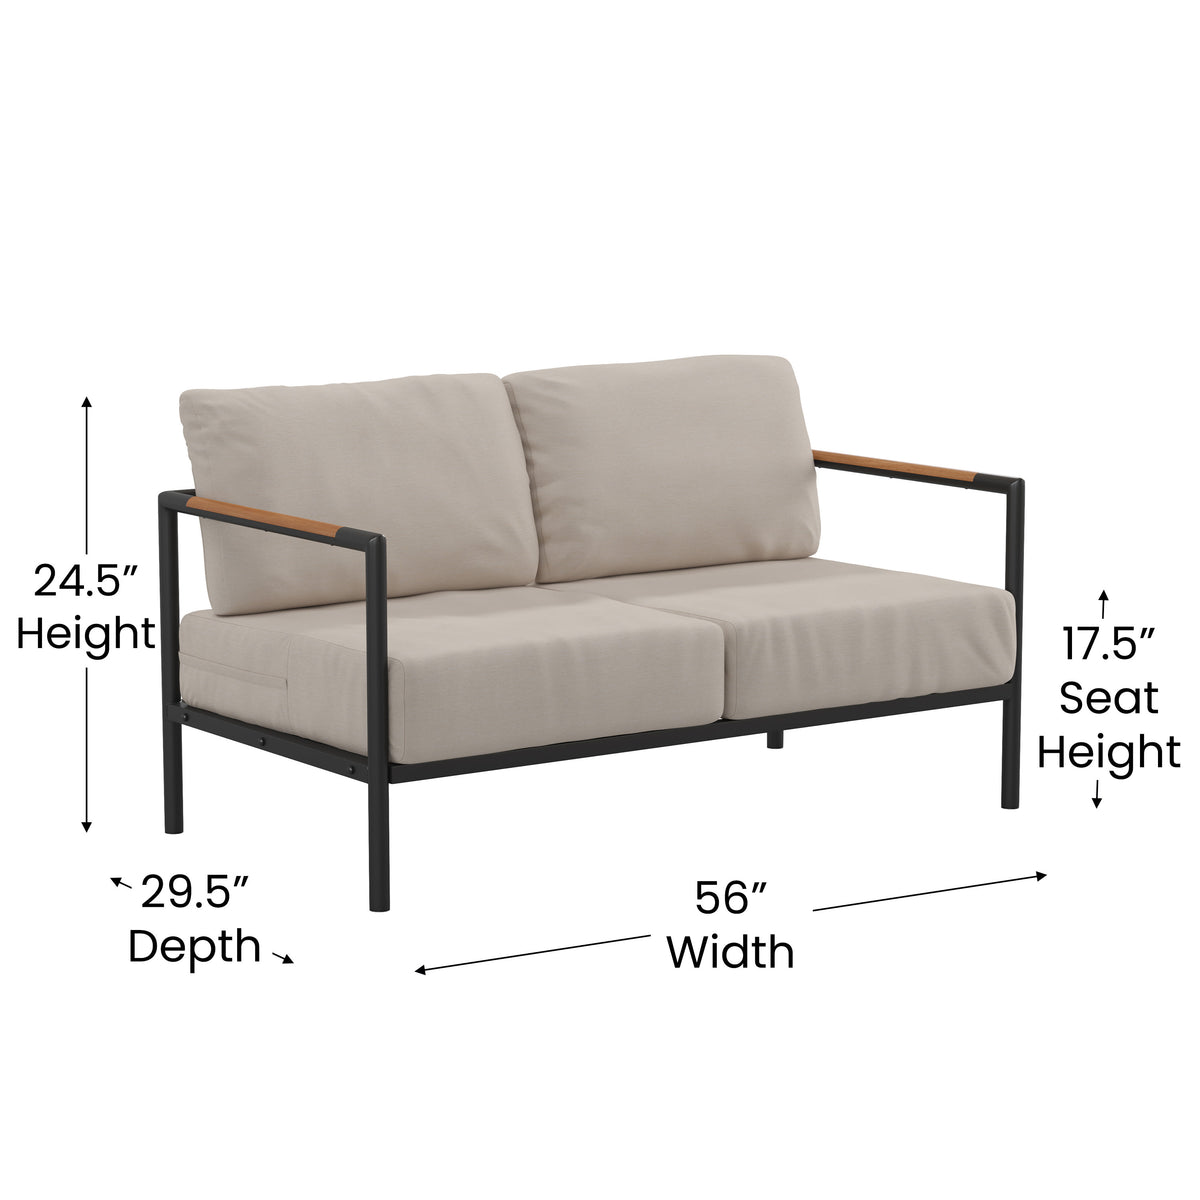 Light Gray |#| Black Aluminum Frame Loveseat with Teak Arm Accents and Beige Cushions